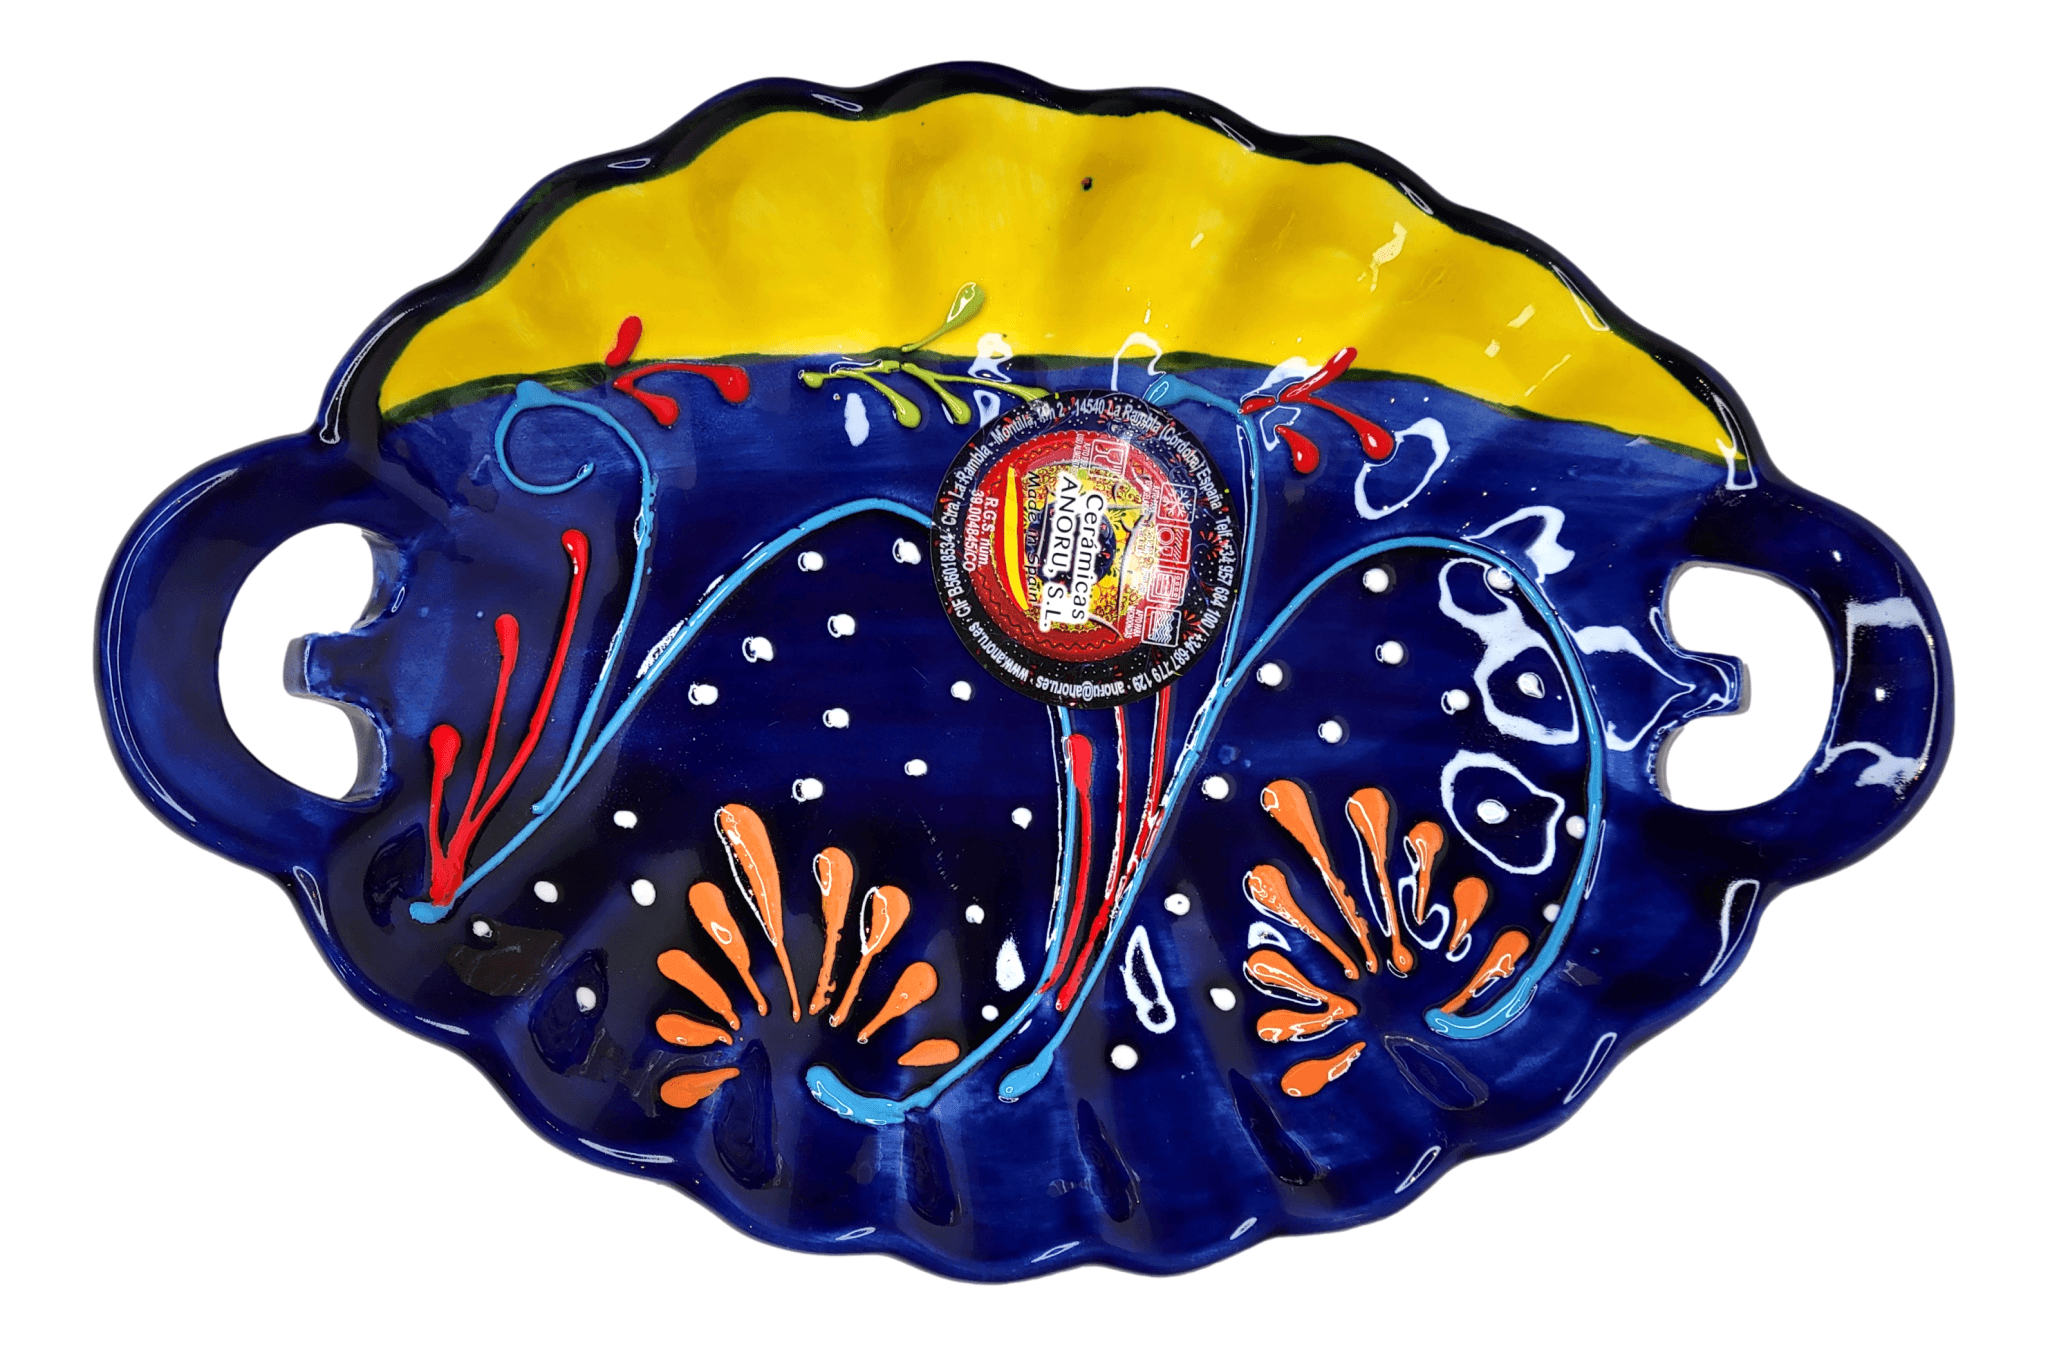 Bowl Large Serving Dish Ceramic Multi-Colored Hand Crafted By Anoru Spain 10 3/4 L x 7 W x 2 H Inches - Ysleta Mission Gift Shop- VOTED El Paso's Best Gift Shop